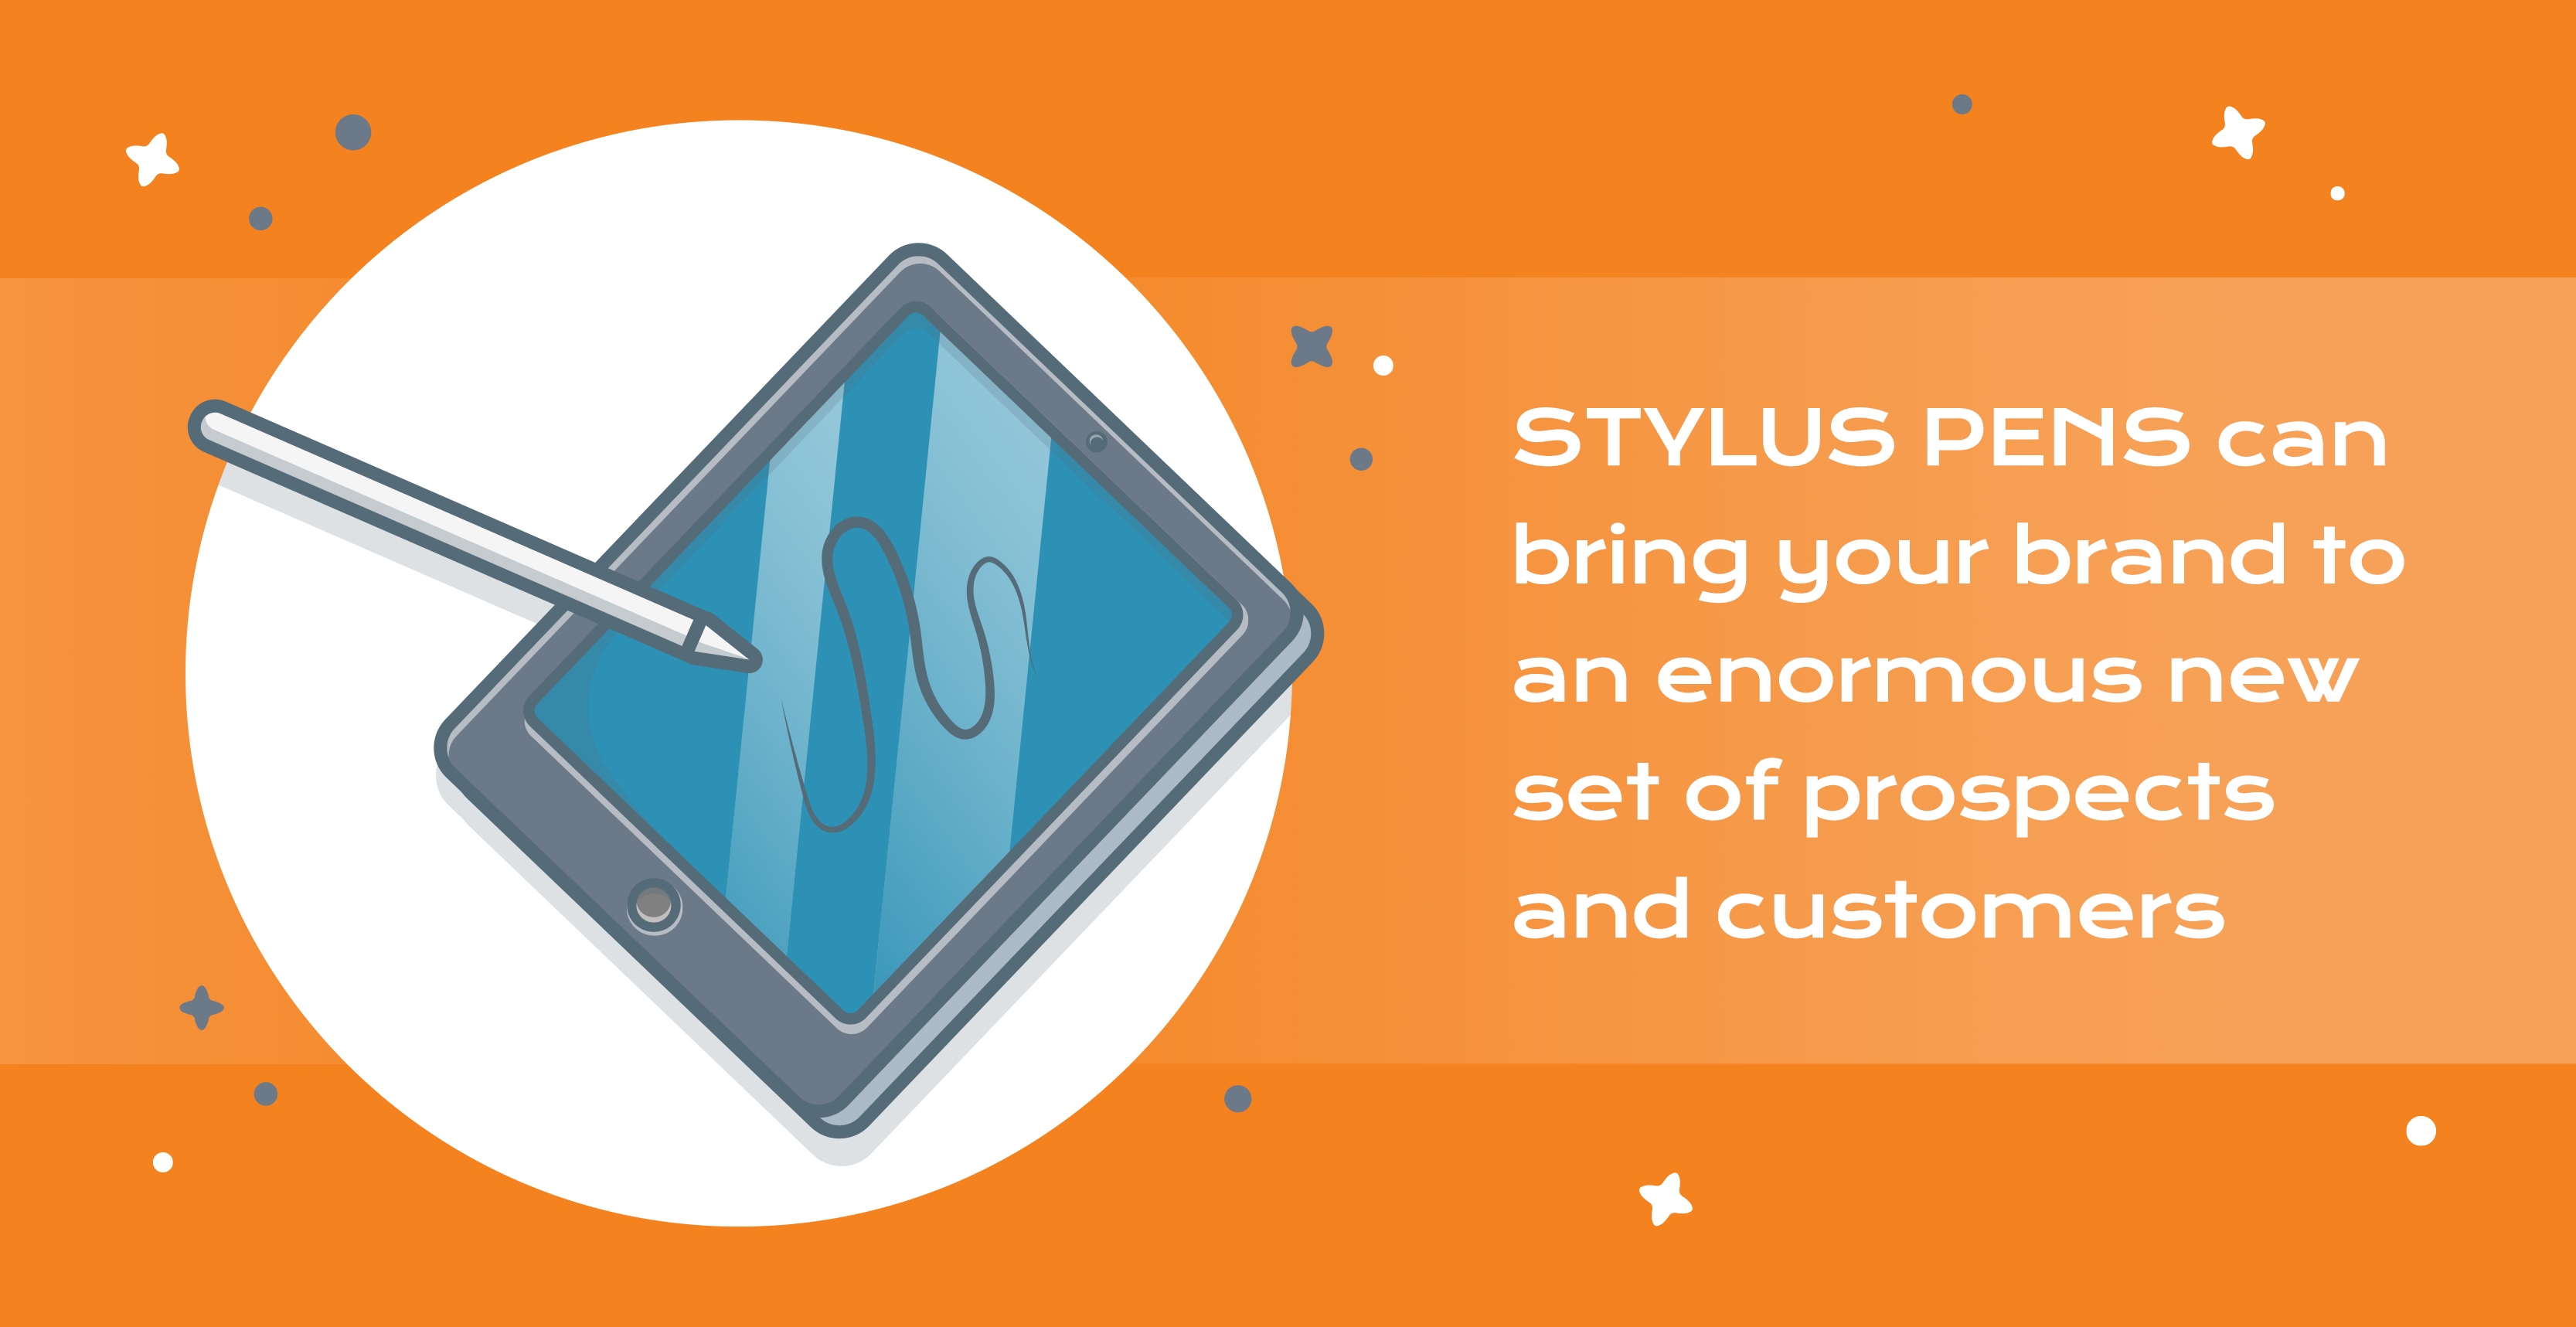 stylus pens bring your brand to new prospects